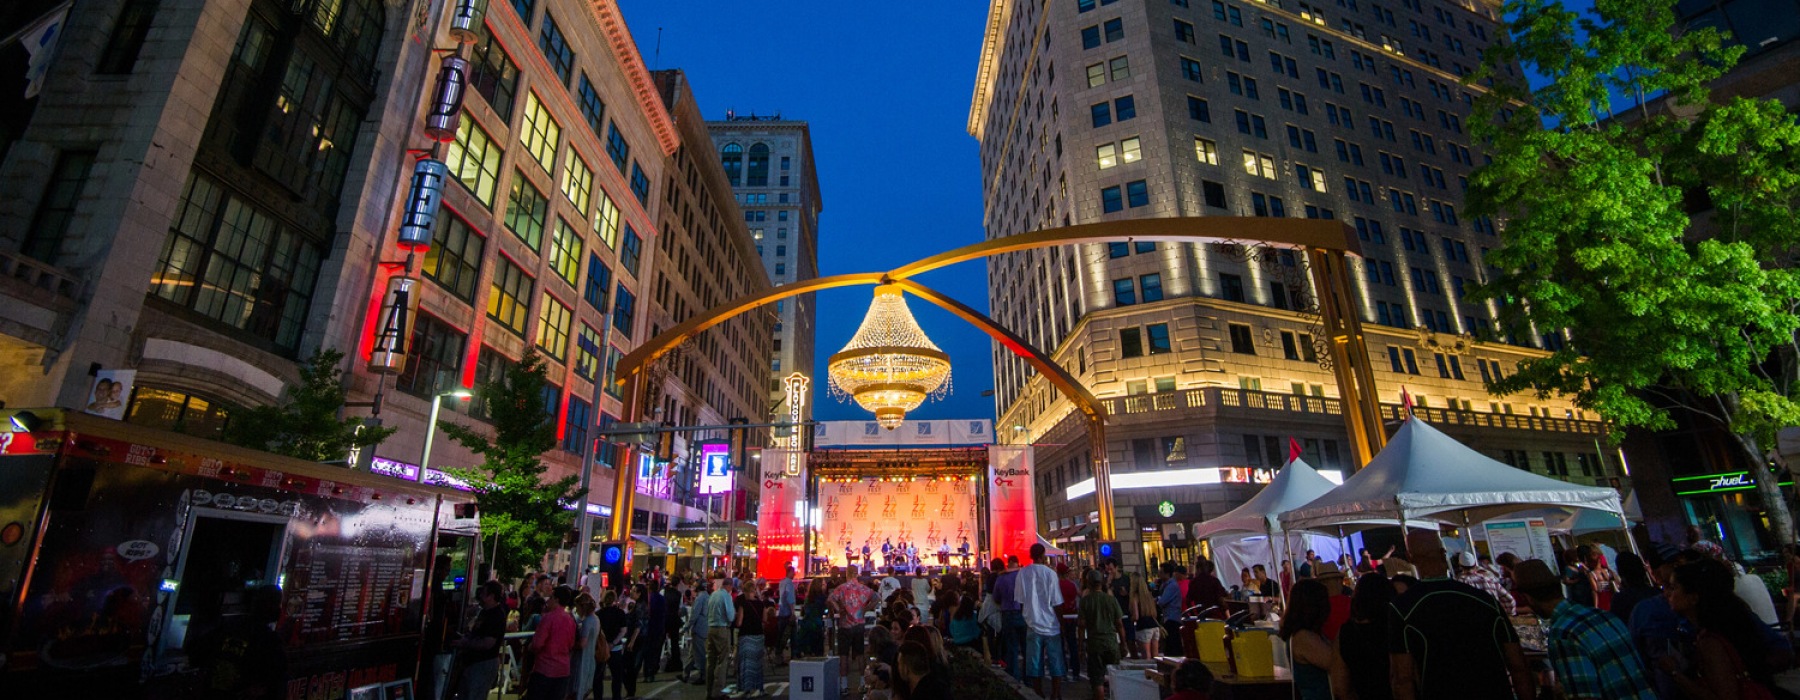 Playhouse Square District